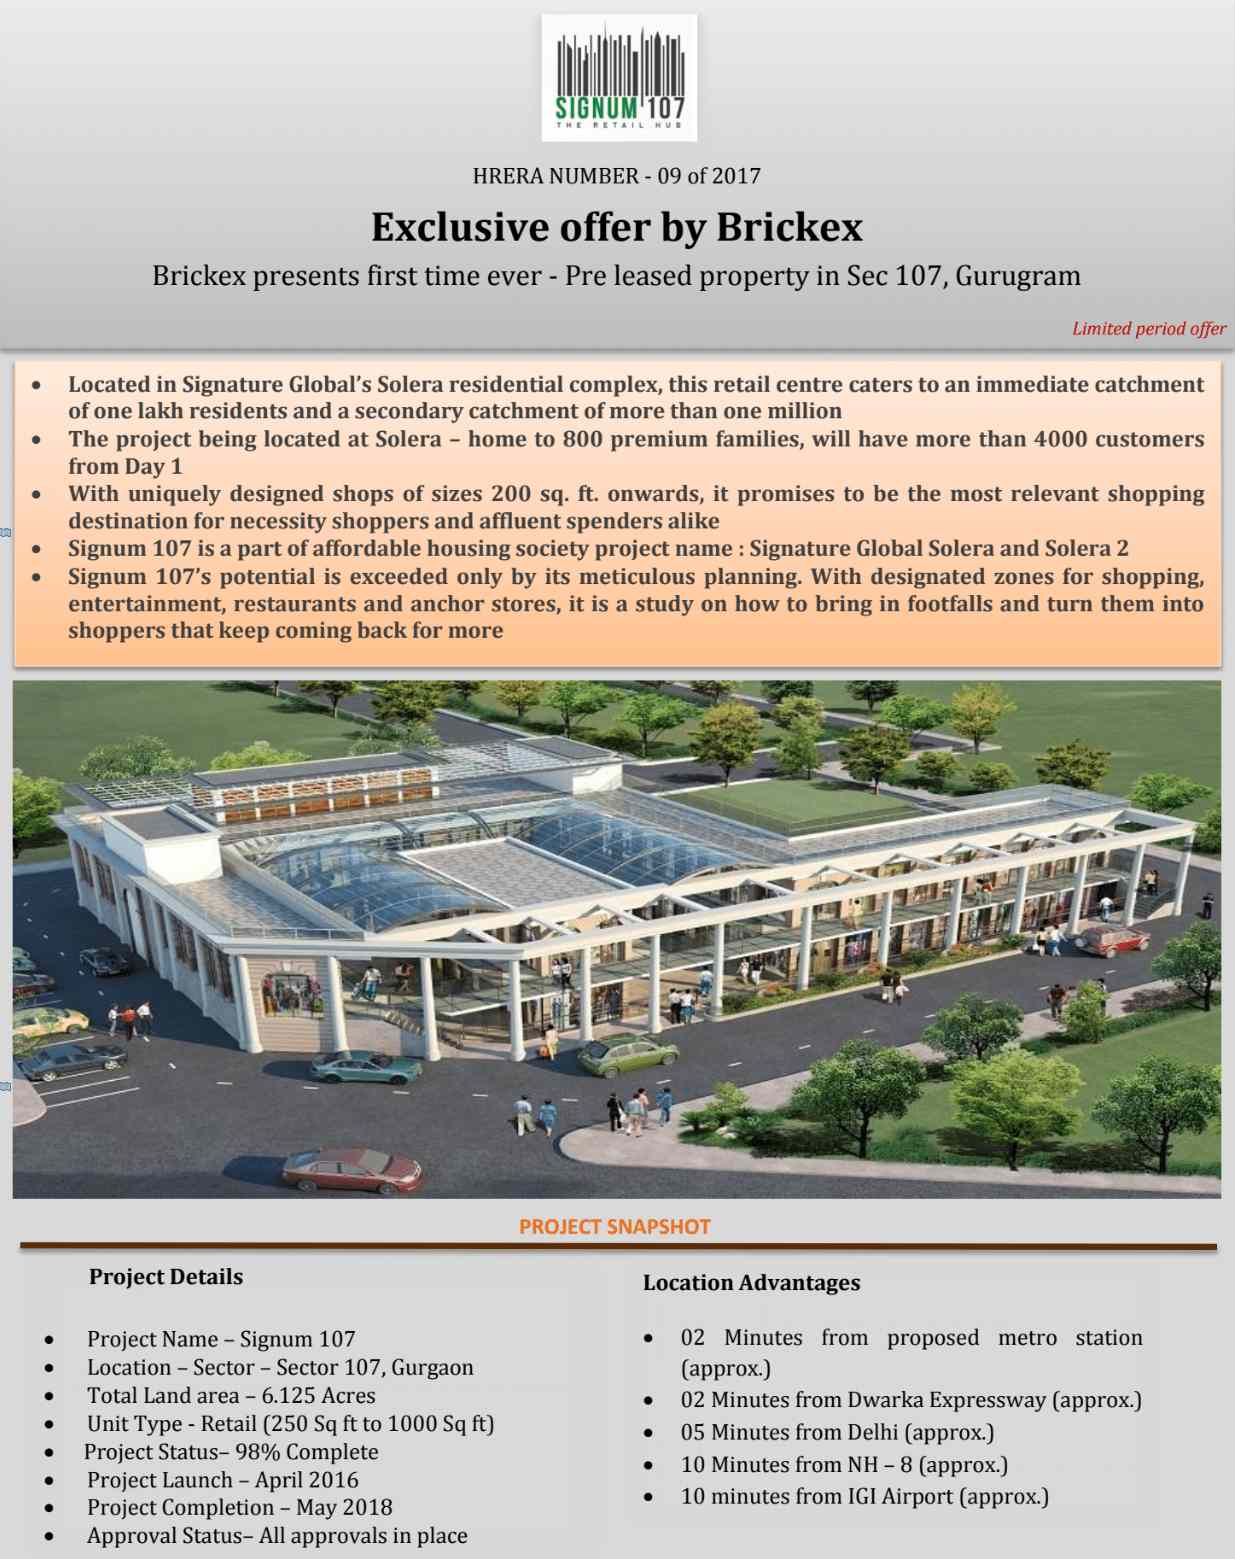 Signature Signum 107 - First ever pre-leased commercial property in Gurgaon Update